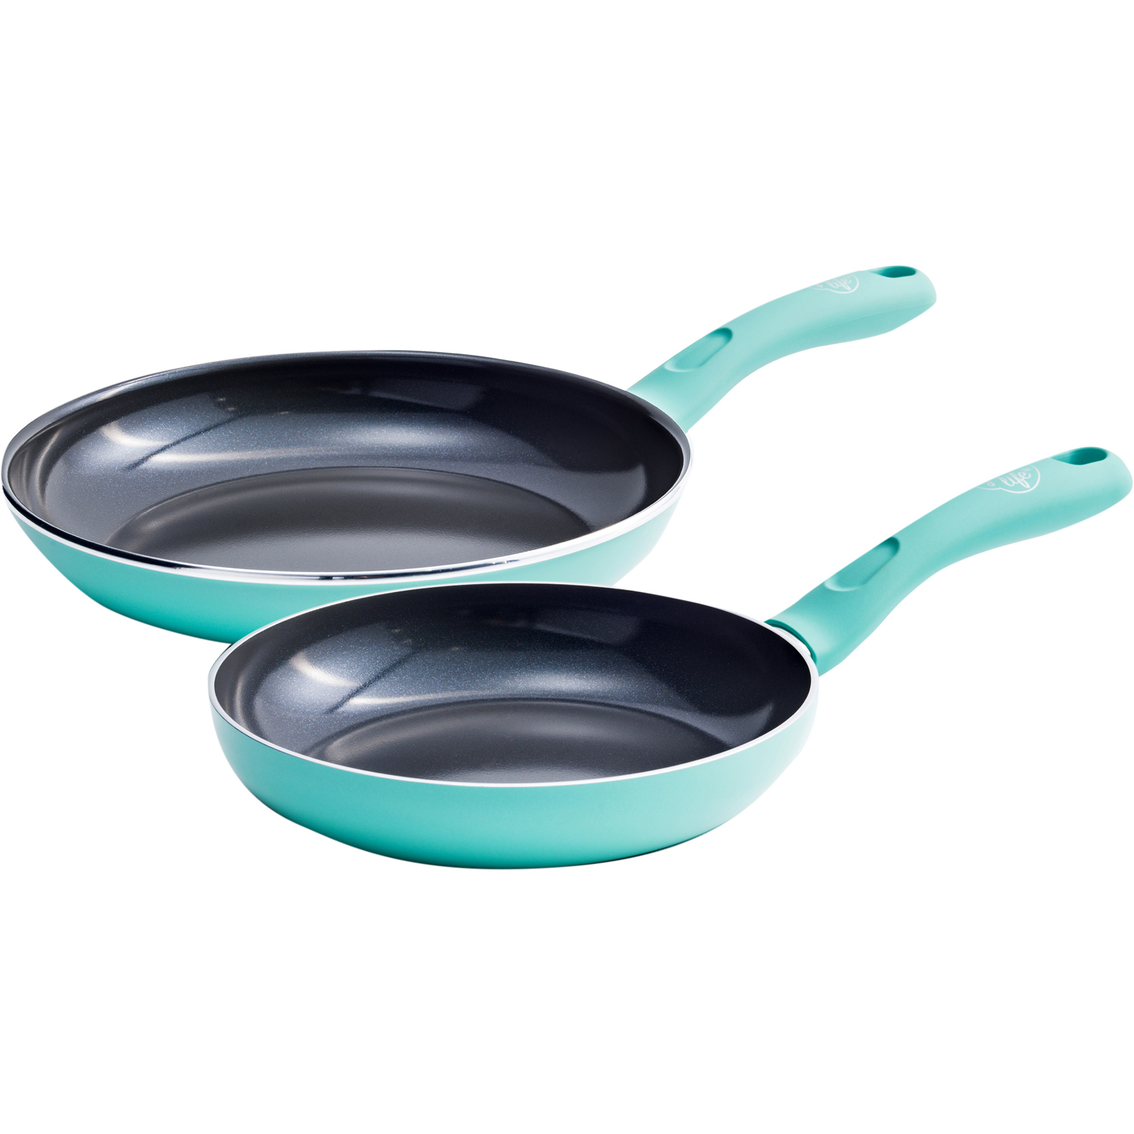 GreenLife 7 in. and 10 in. Diamond Ceramic Nonstick Frypan Set - Image 1 of 7